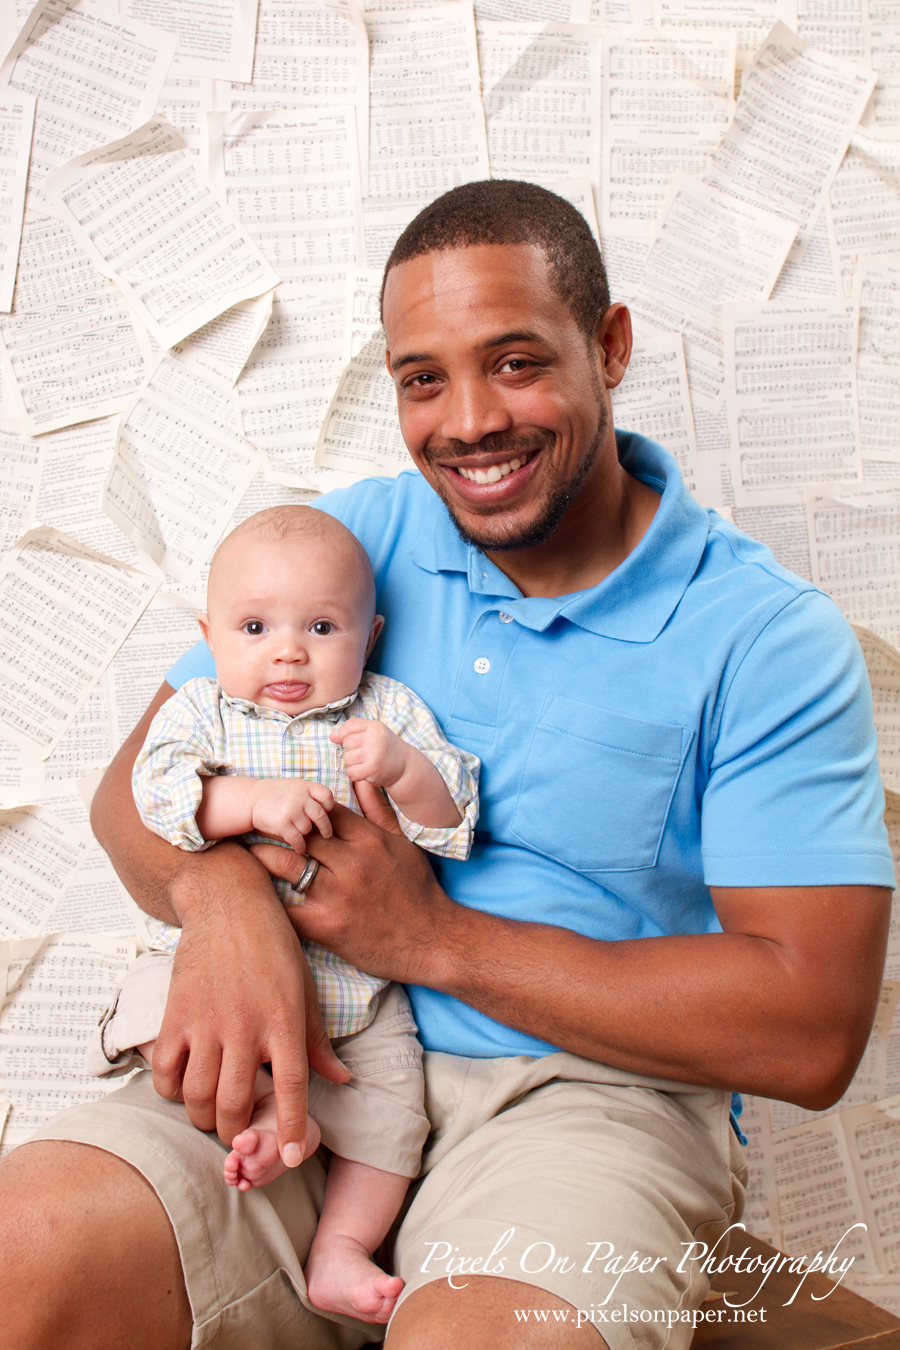 Baby Isaiah with Dad in studio portrait photo